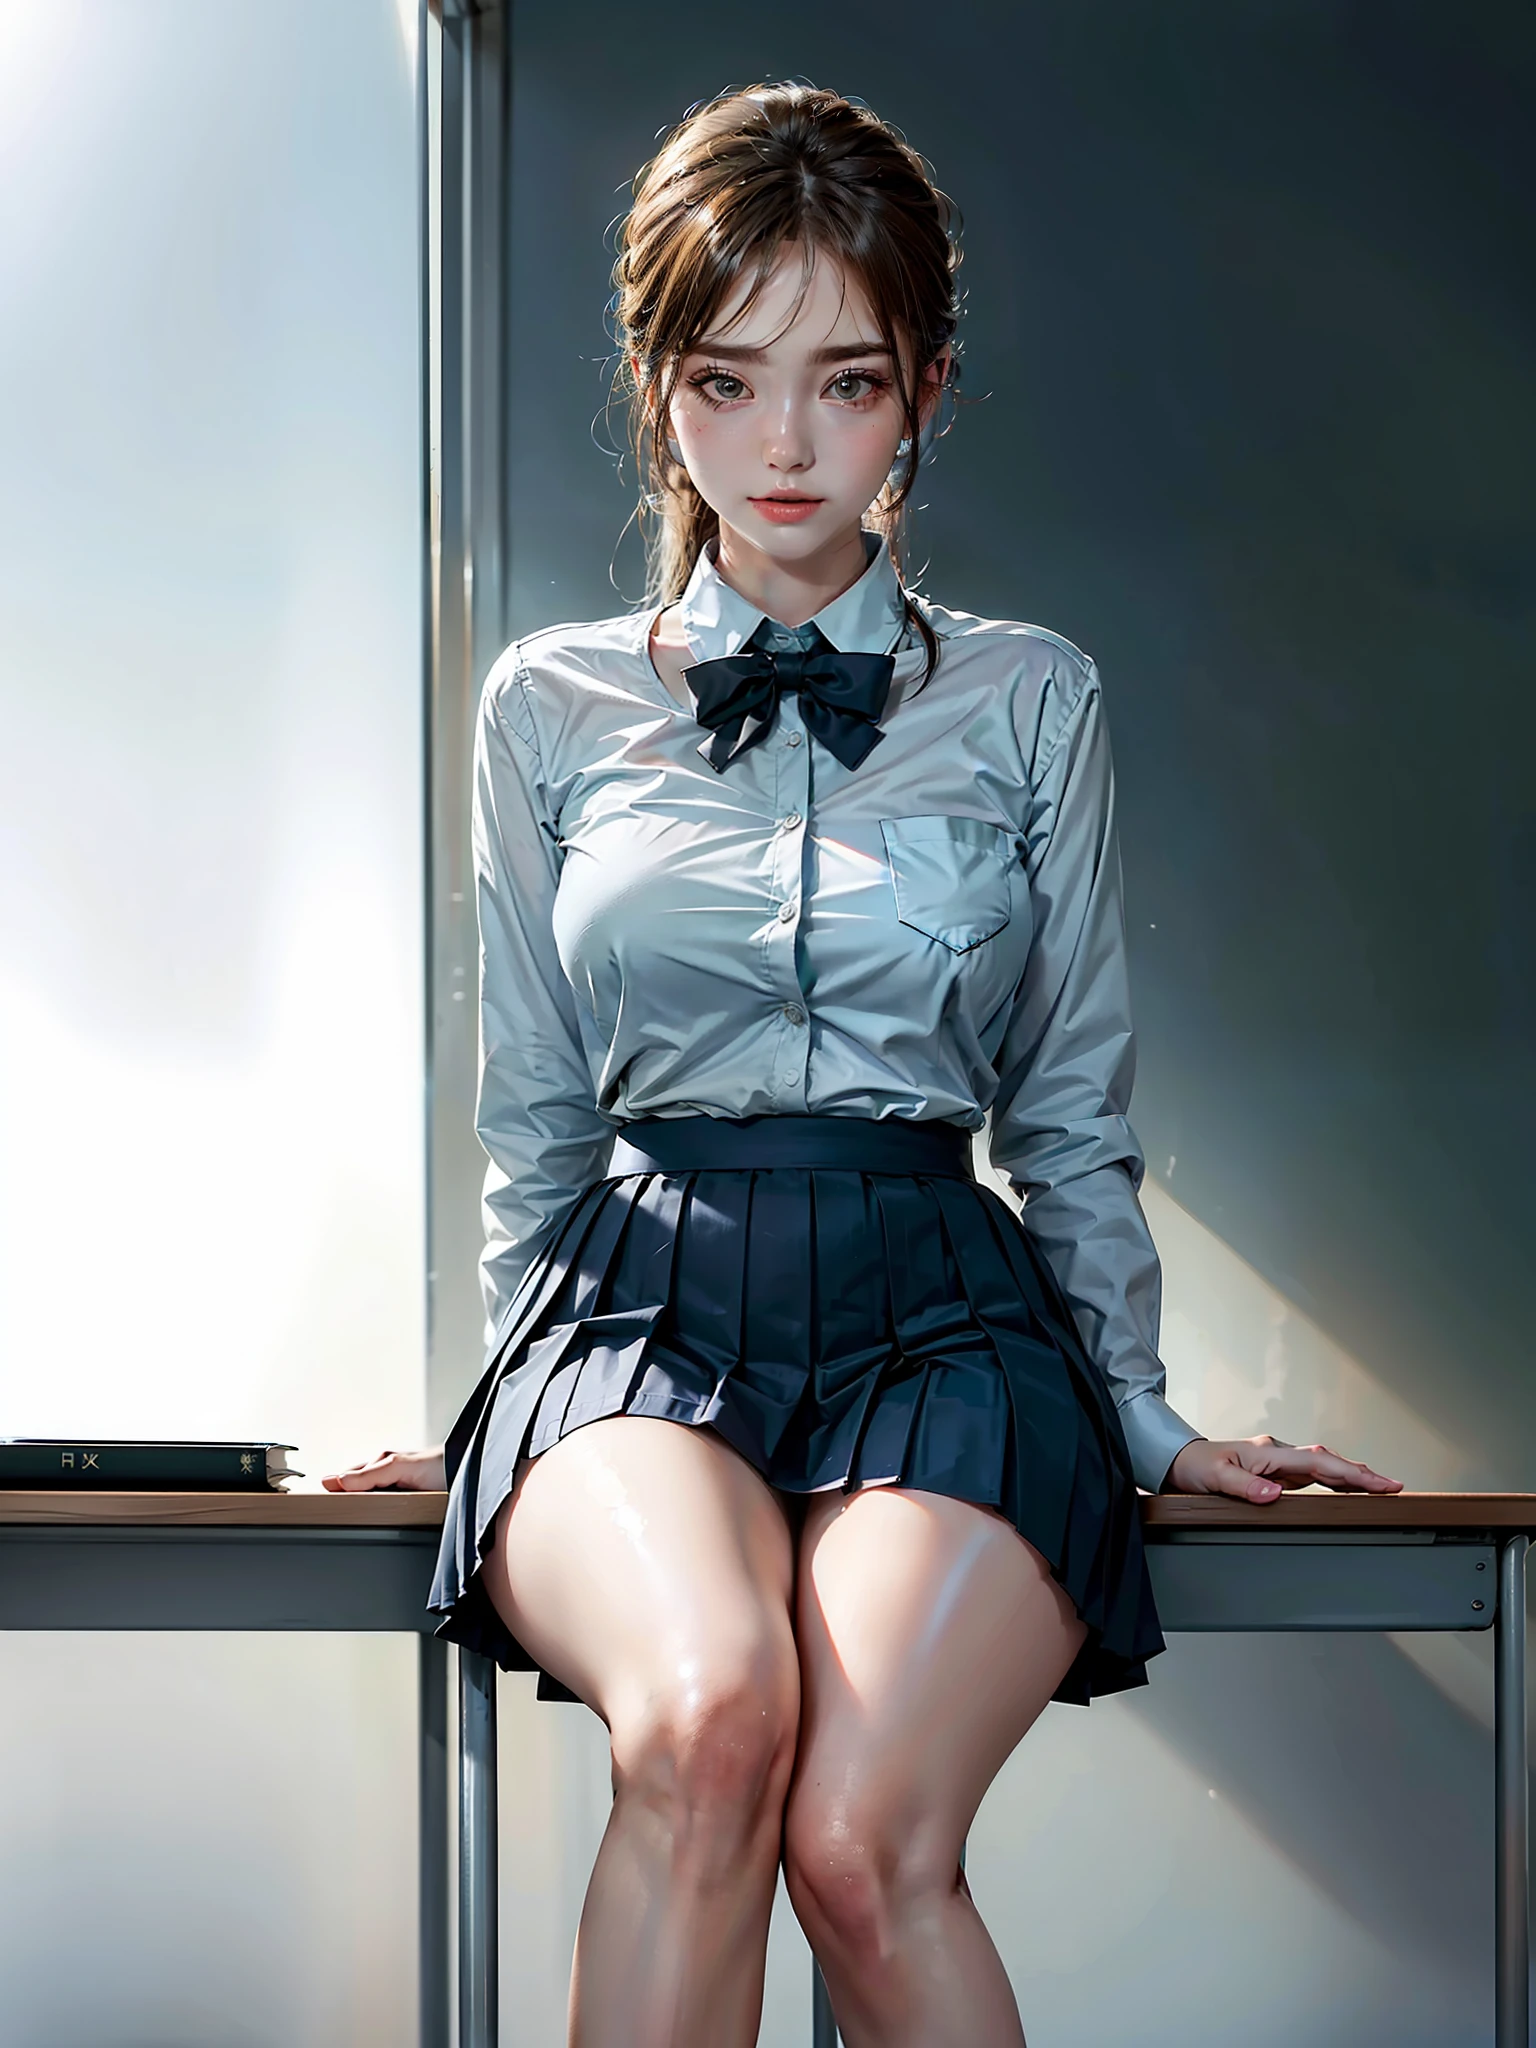 , skirt, (high thighs), (((head off the board))), (sitting in the chair), (((classroom)), (((under the table view)))), crossed legs, masterpiece, best quality, extremely detailed, scenery